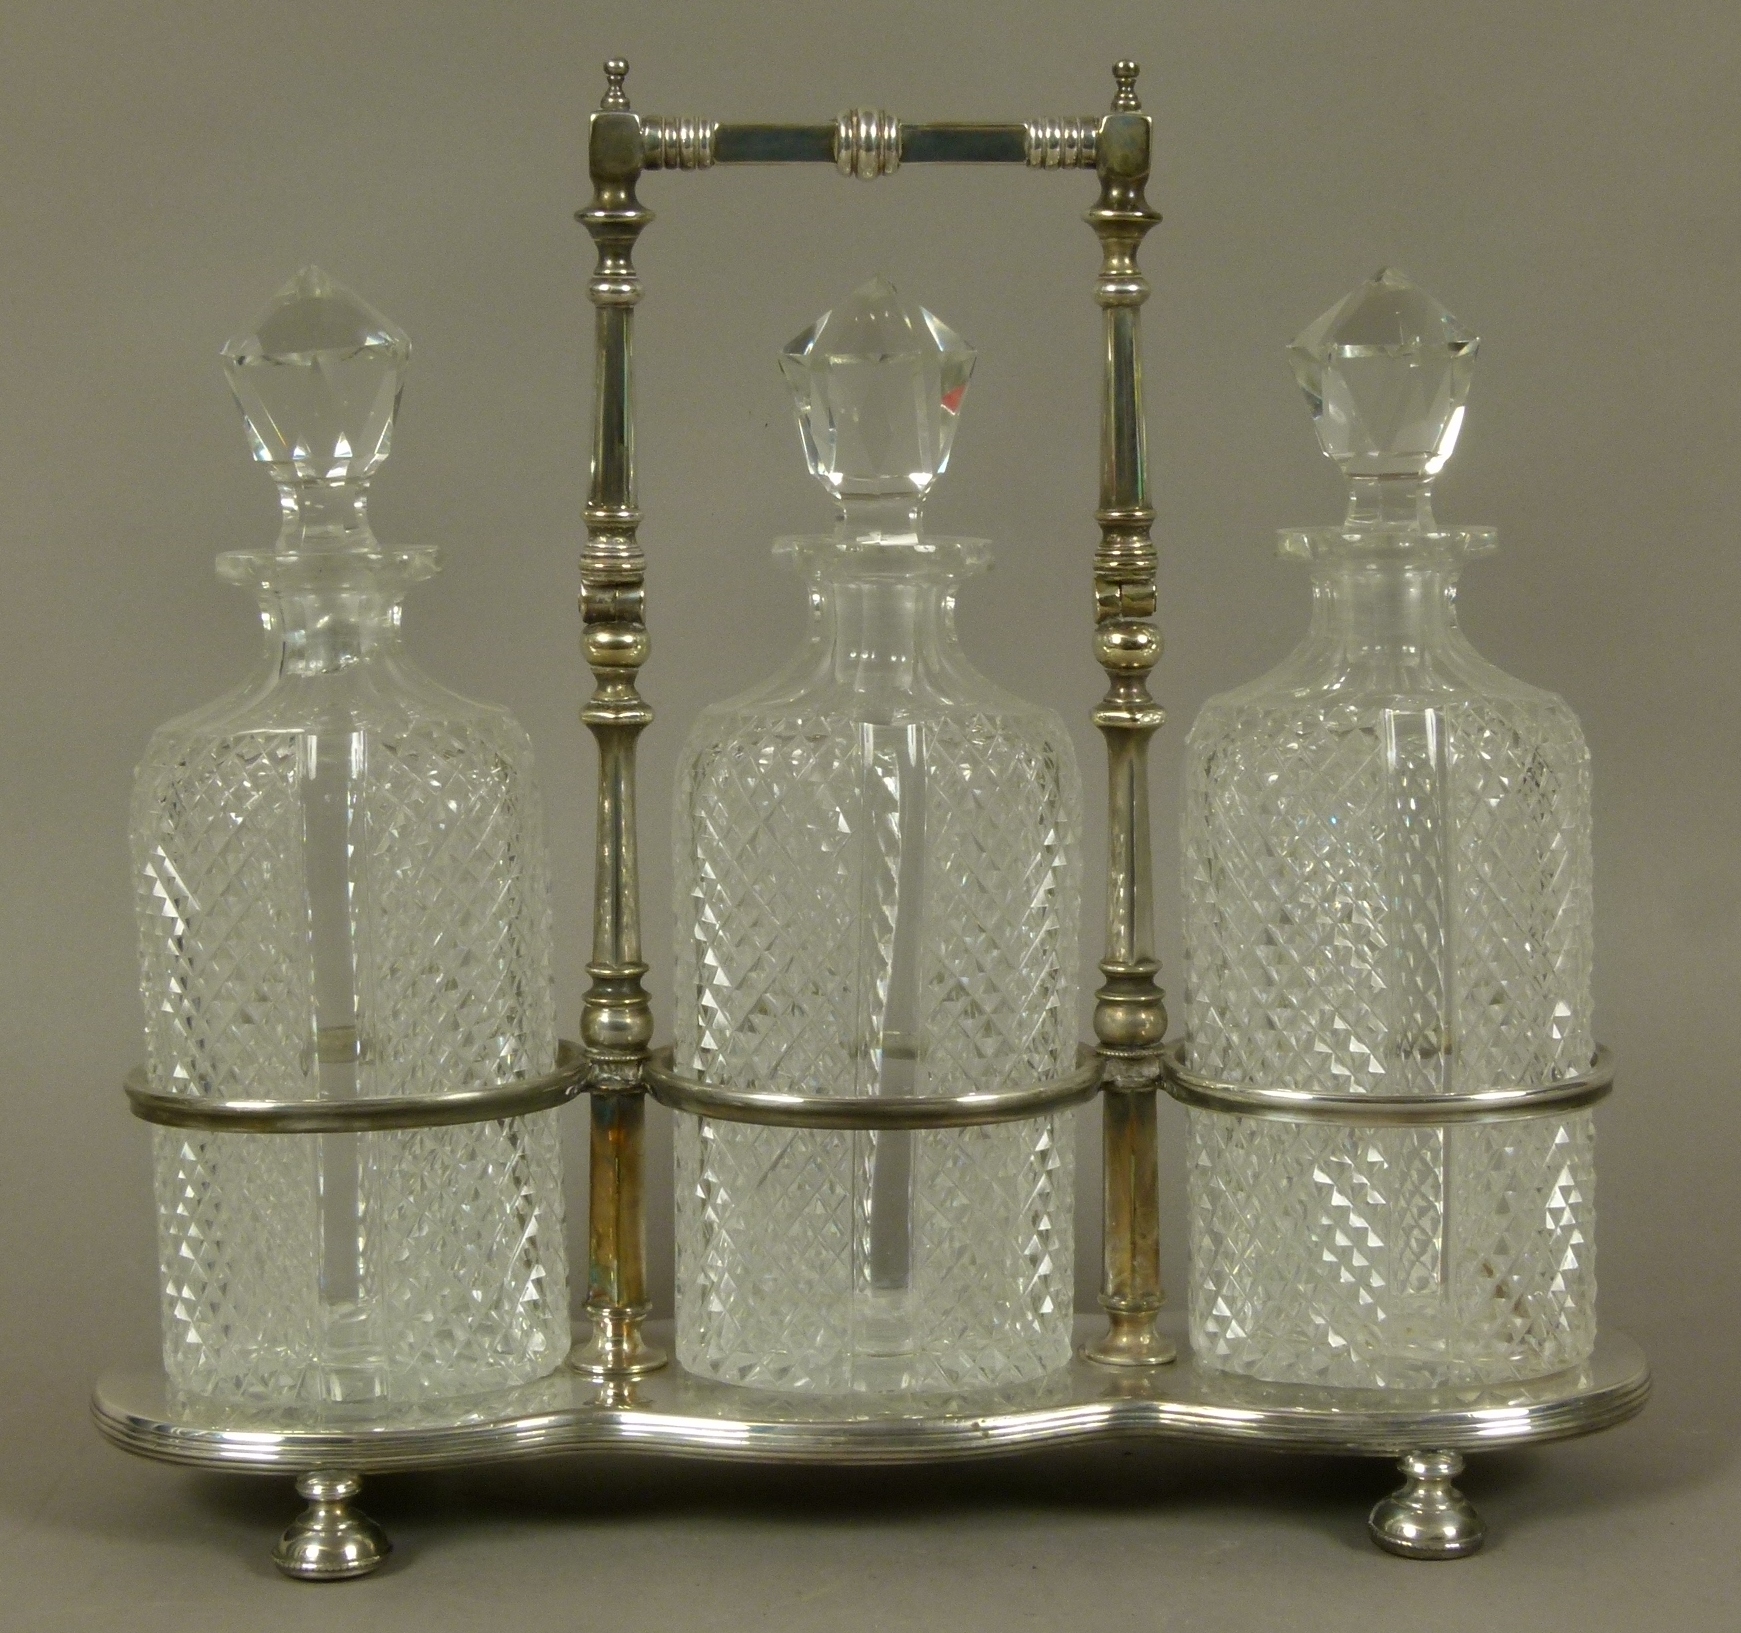 A late Victorian/Edwardian VII silver plated triple decanter stand and three diamond cut glass